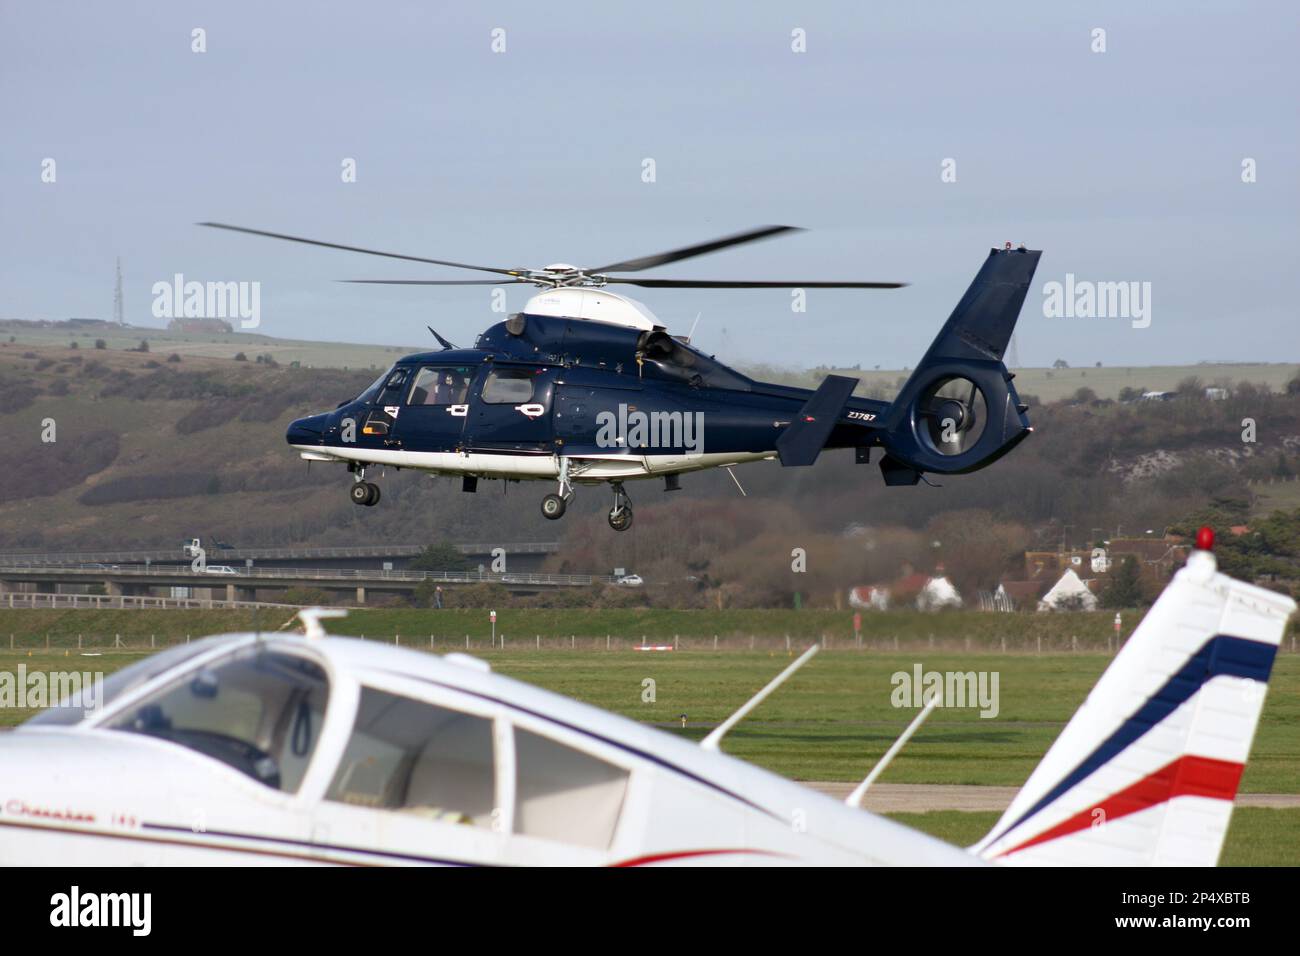 UK Army Air Corps Eurocopter AS 365N3 Dauphin departs Brighton City Airport Stock Photo